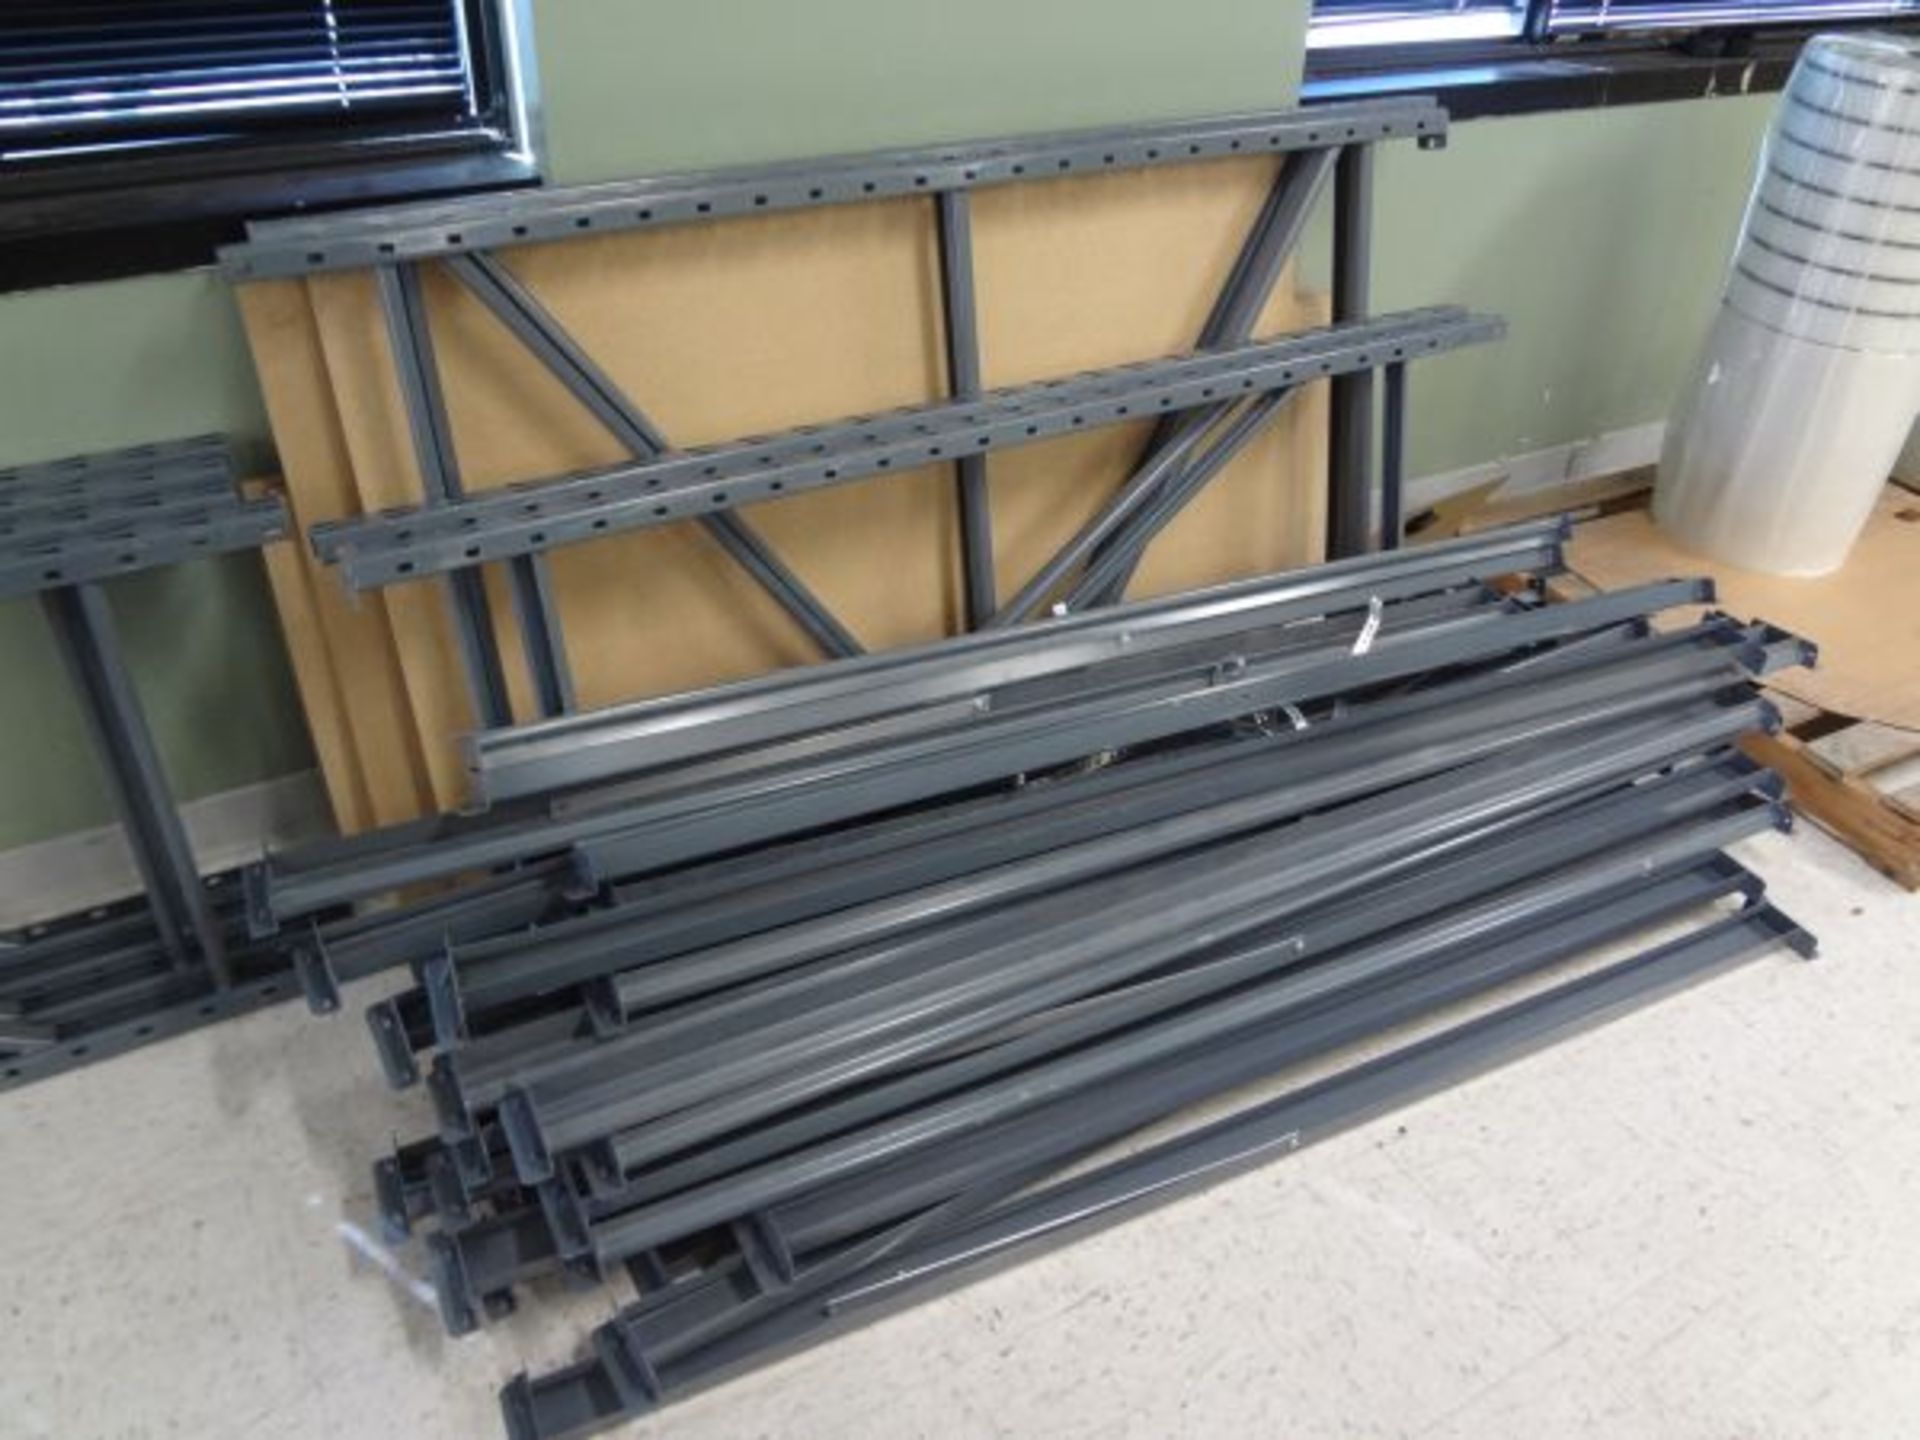 (LOT) (7) SECTIONS (1) 36" X 72" X 72" & (5) 24" X 72" X 72" ADJUSTABLE RACKS INCLUDING (2) 36" X - Image 3 of 4